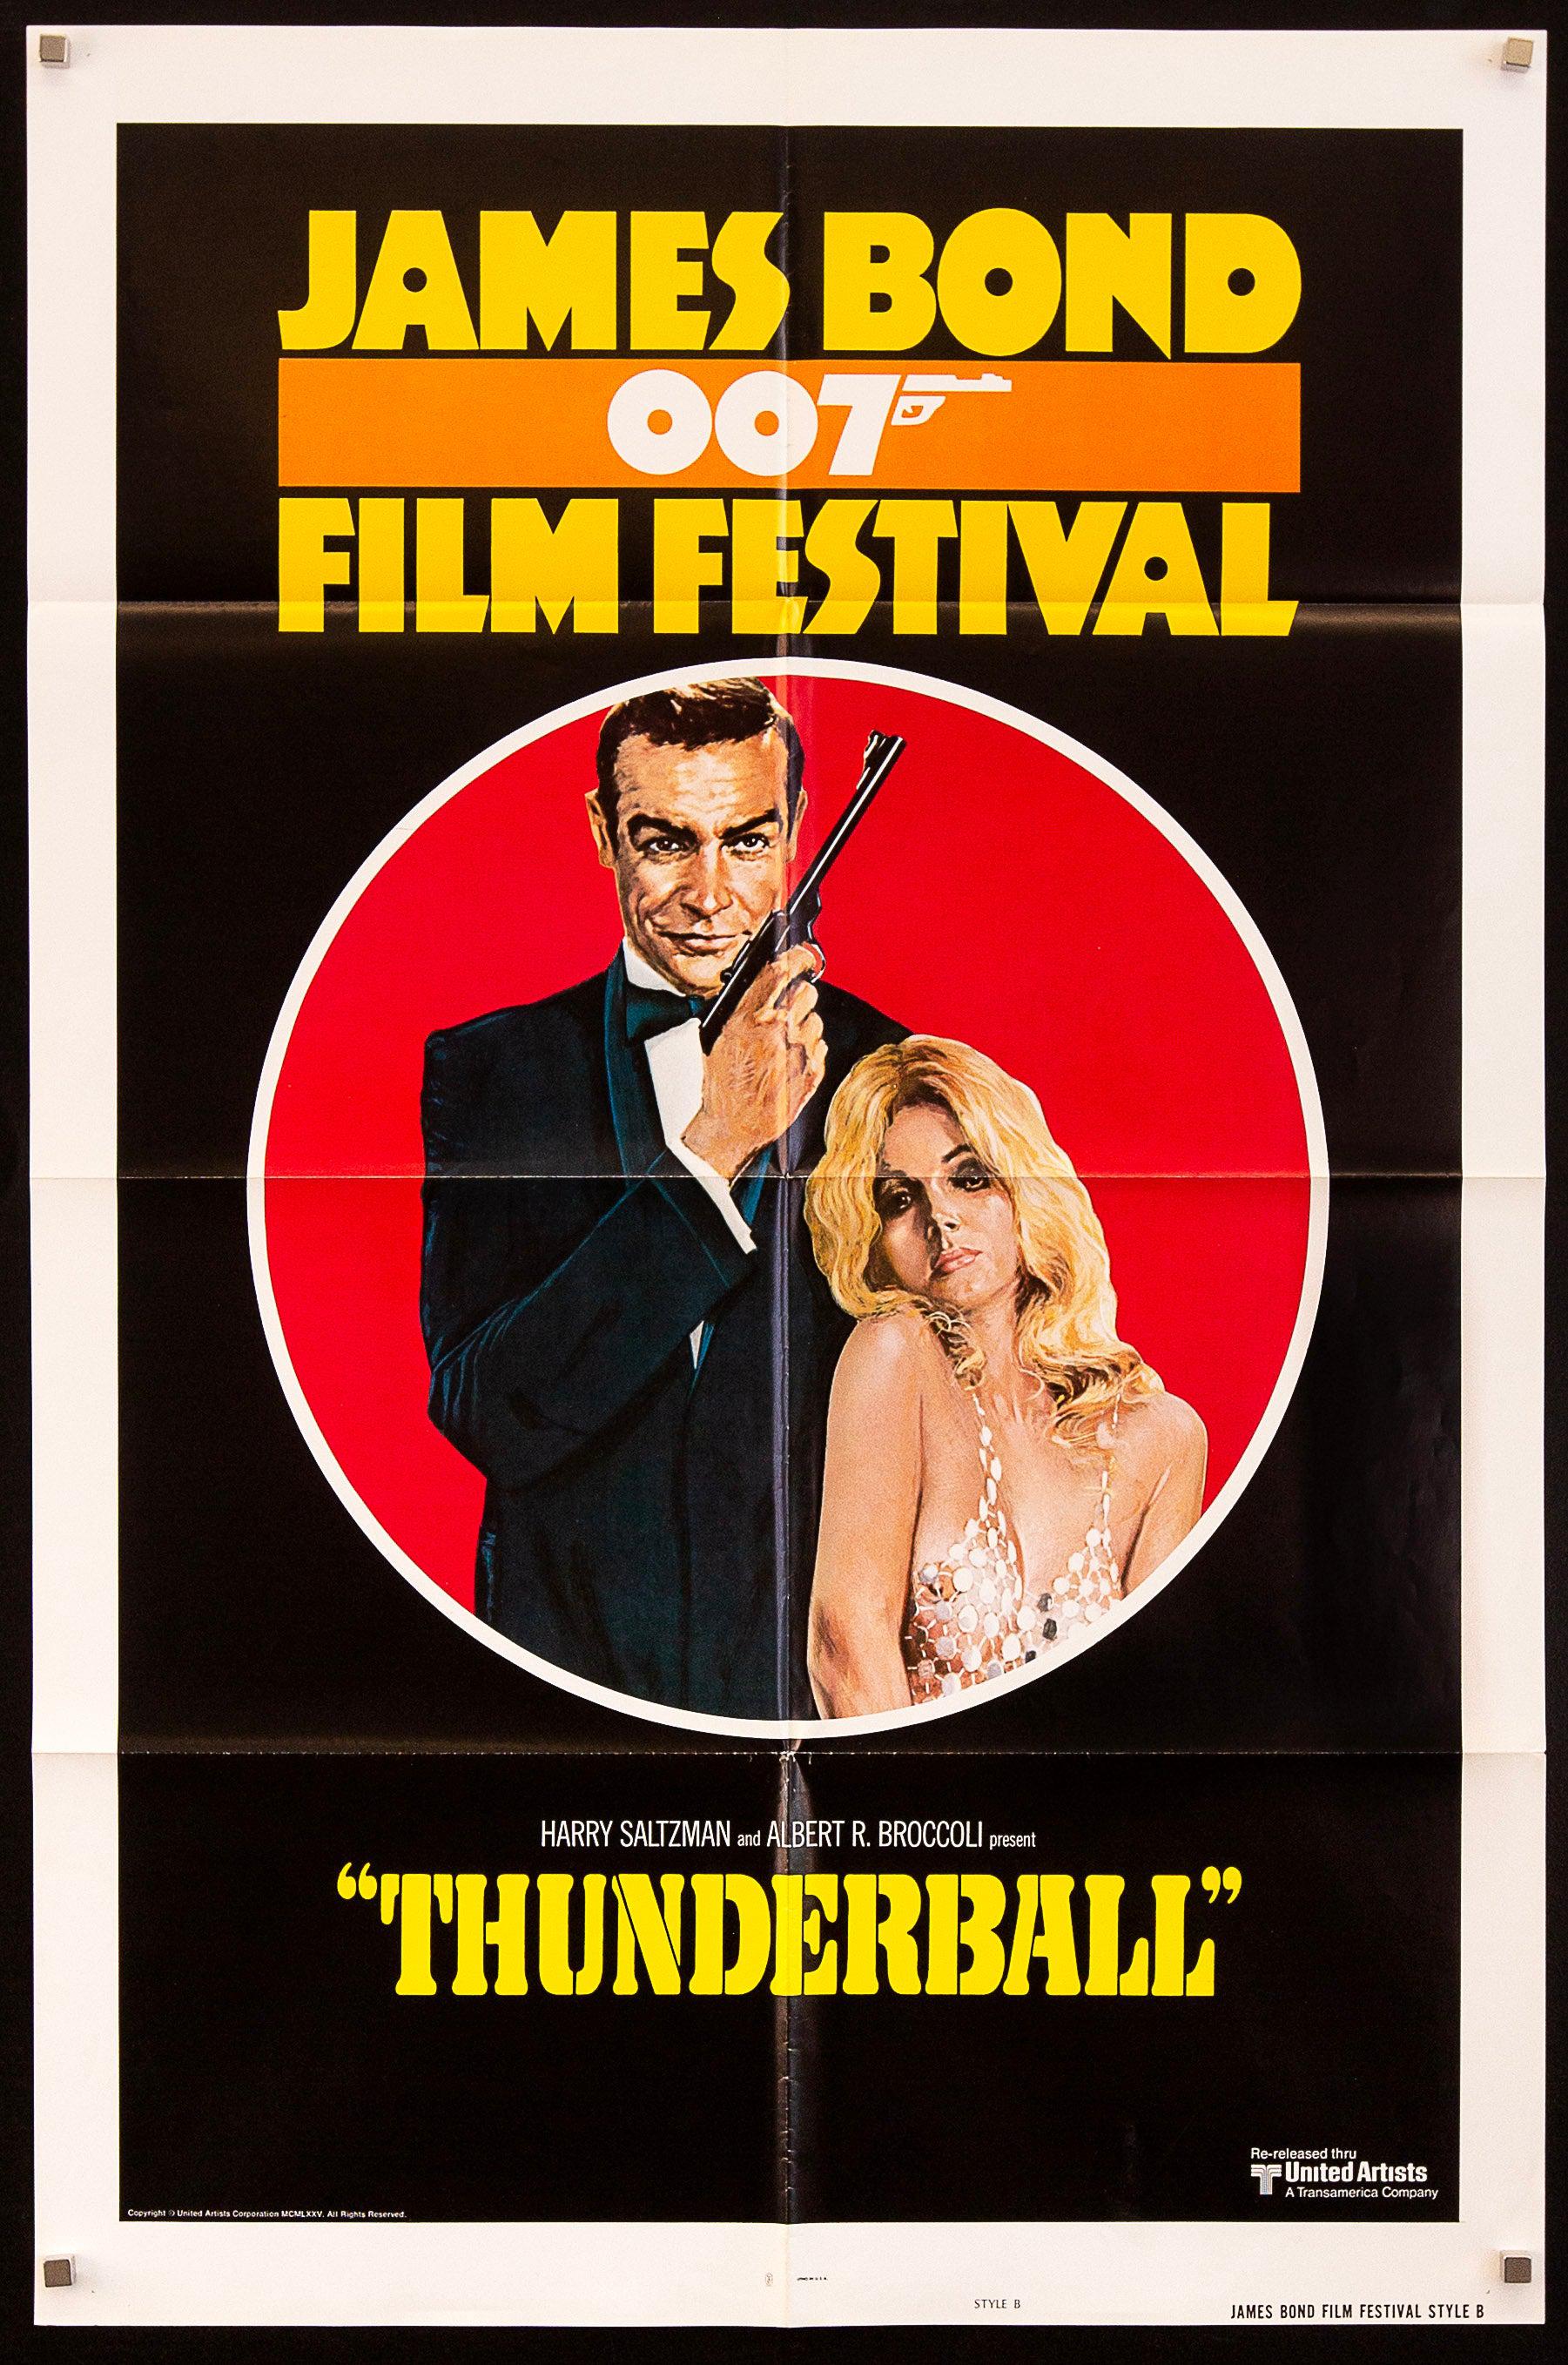 James Bond Thunderball Posters Explore Now The Iconic 007, 52% OFF